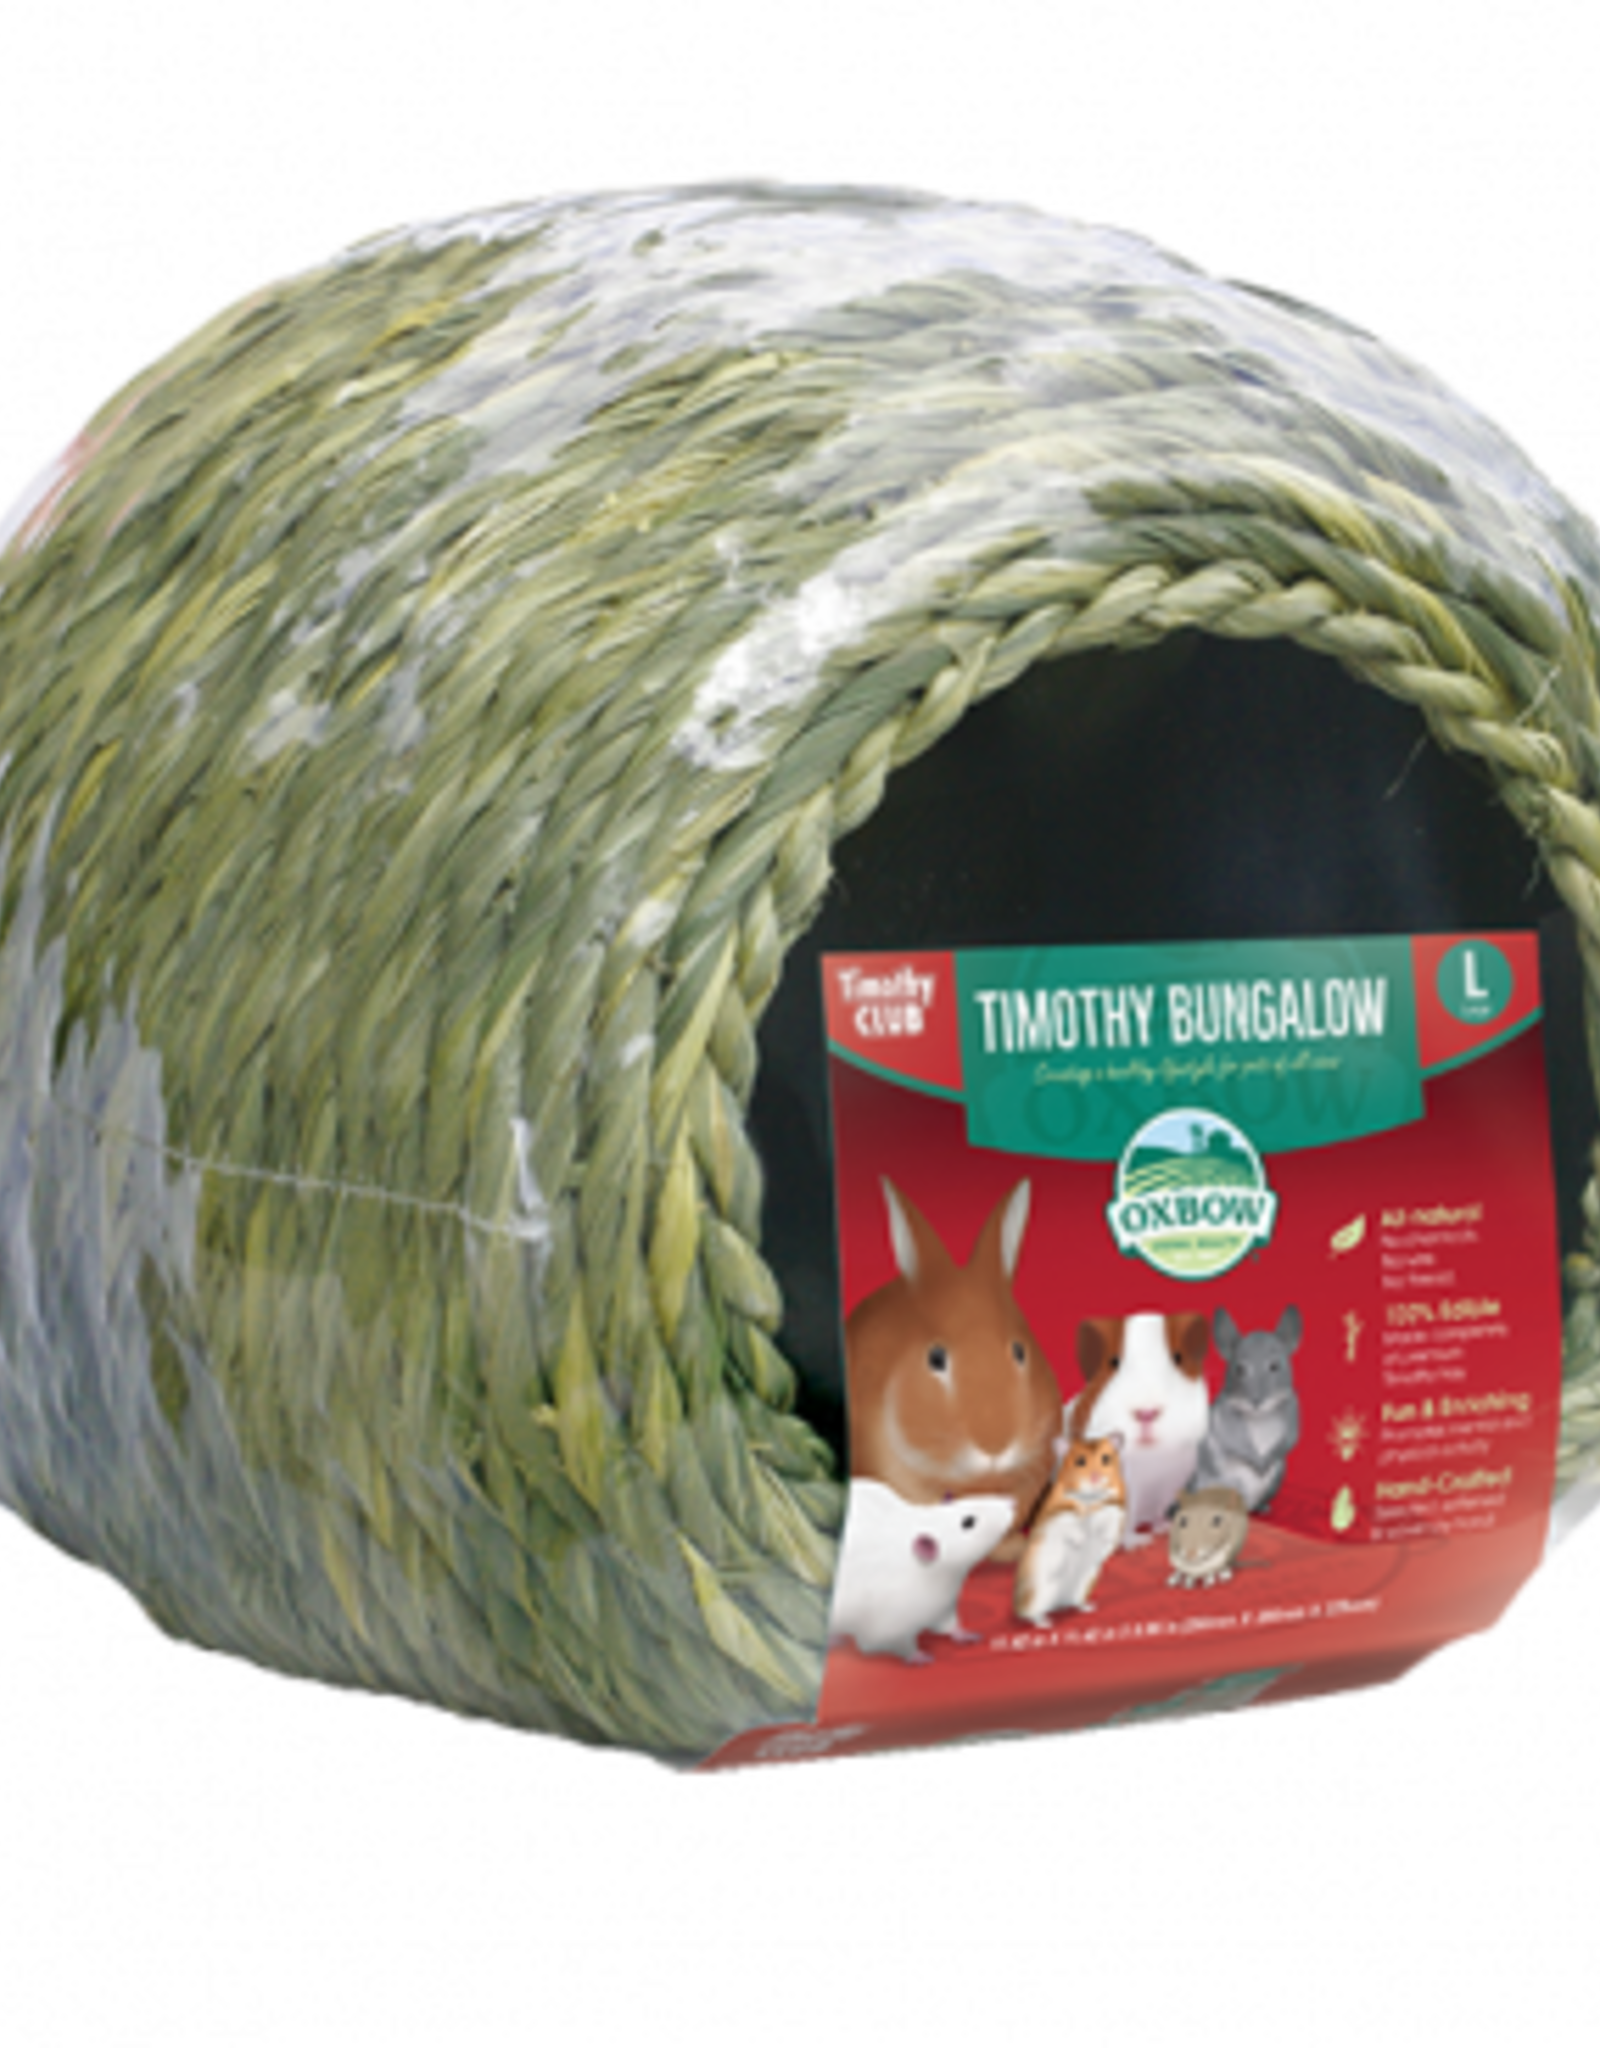 OXBOW PET PRODUCTS OXBOW TIMOTHY HAY BUNGALOW LARGE